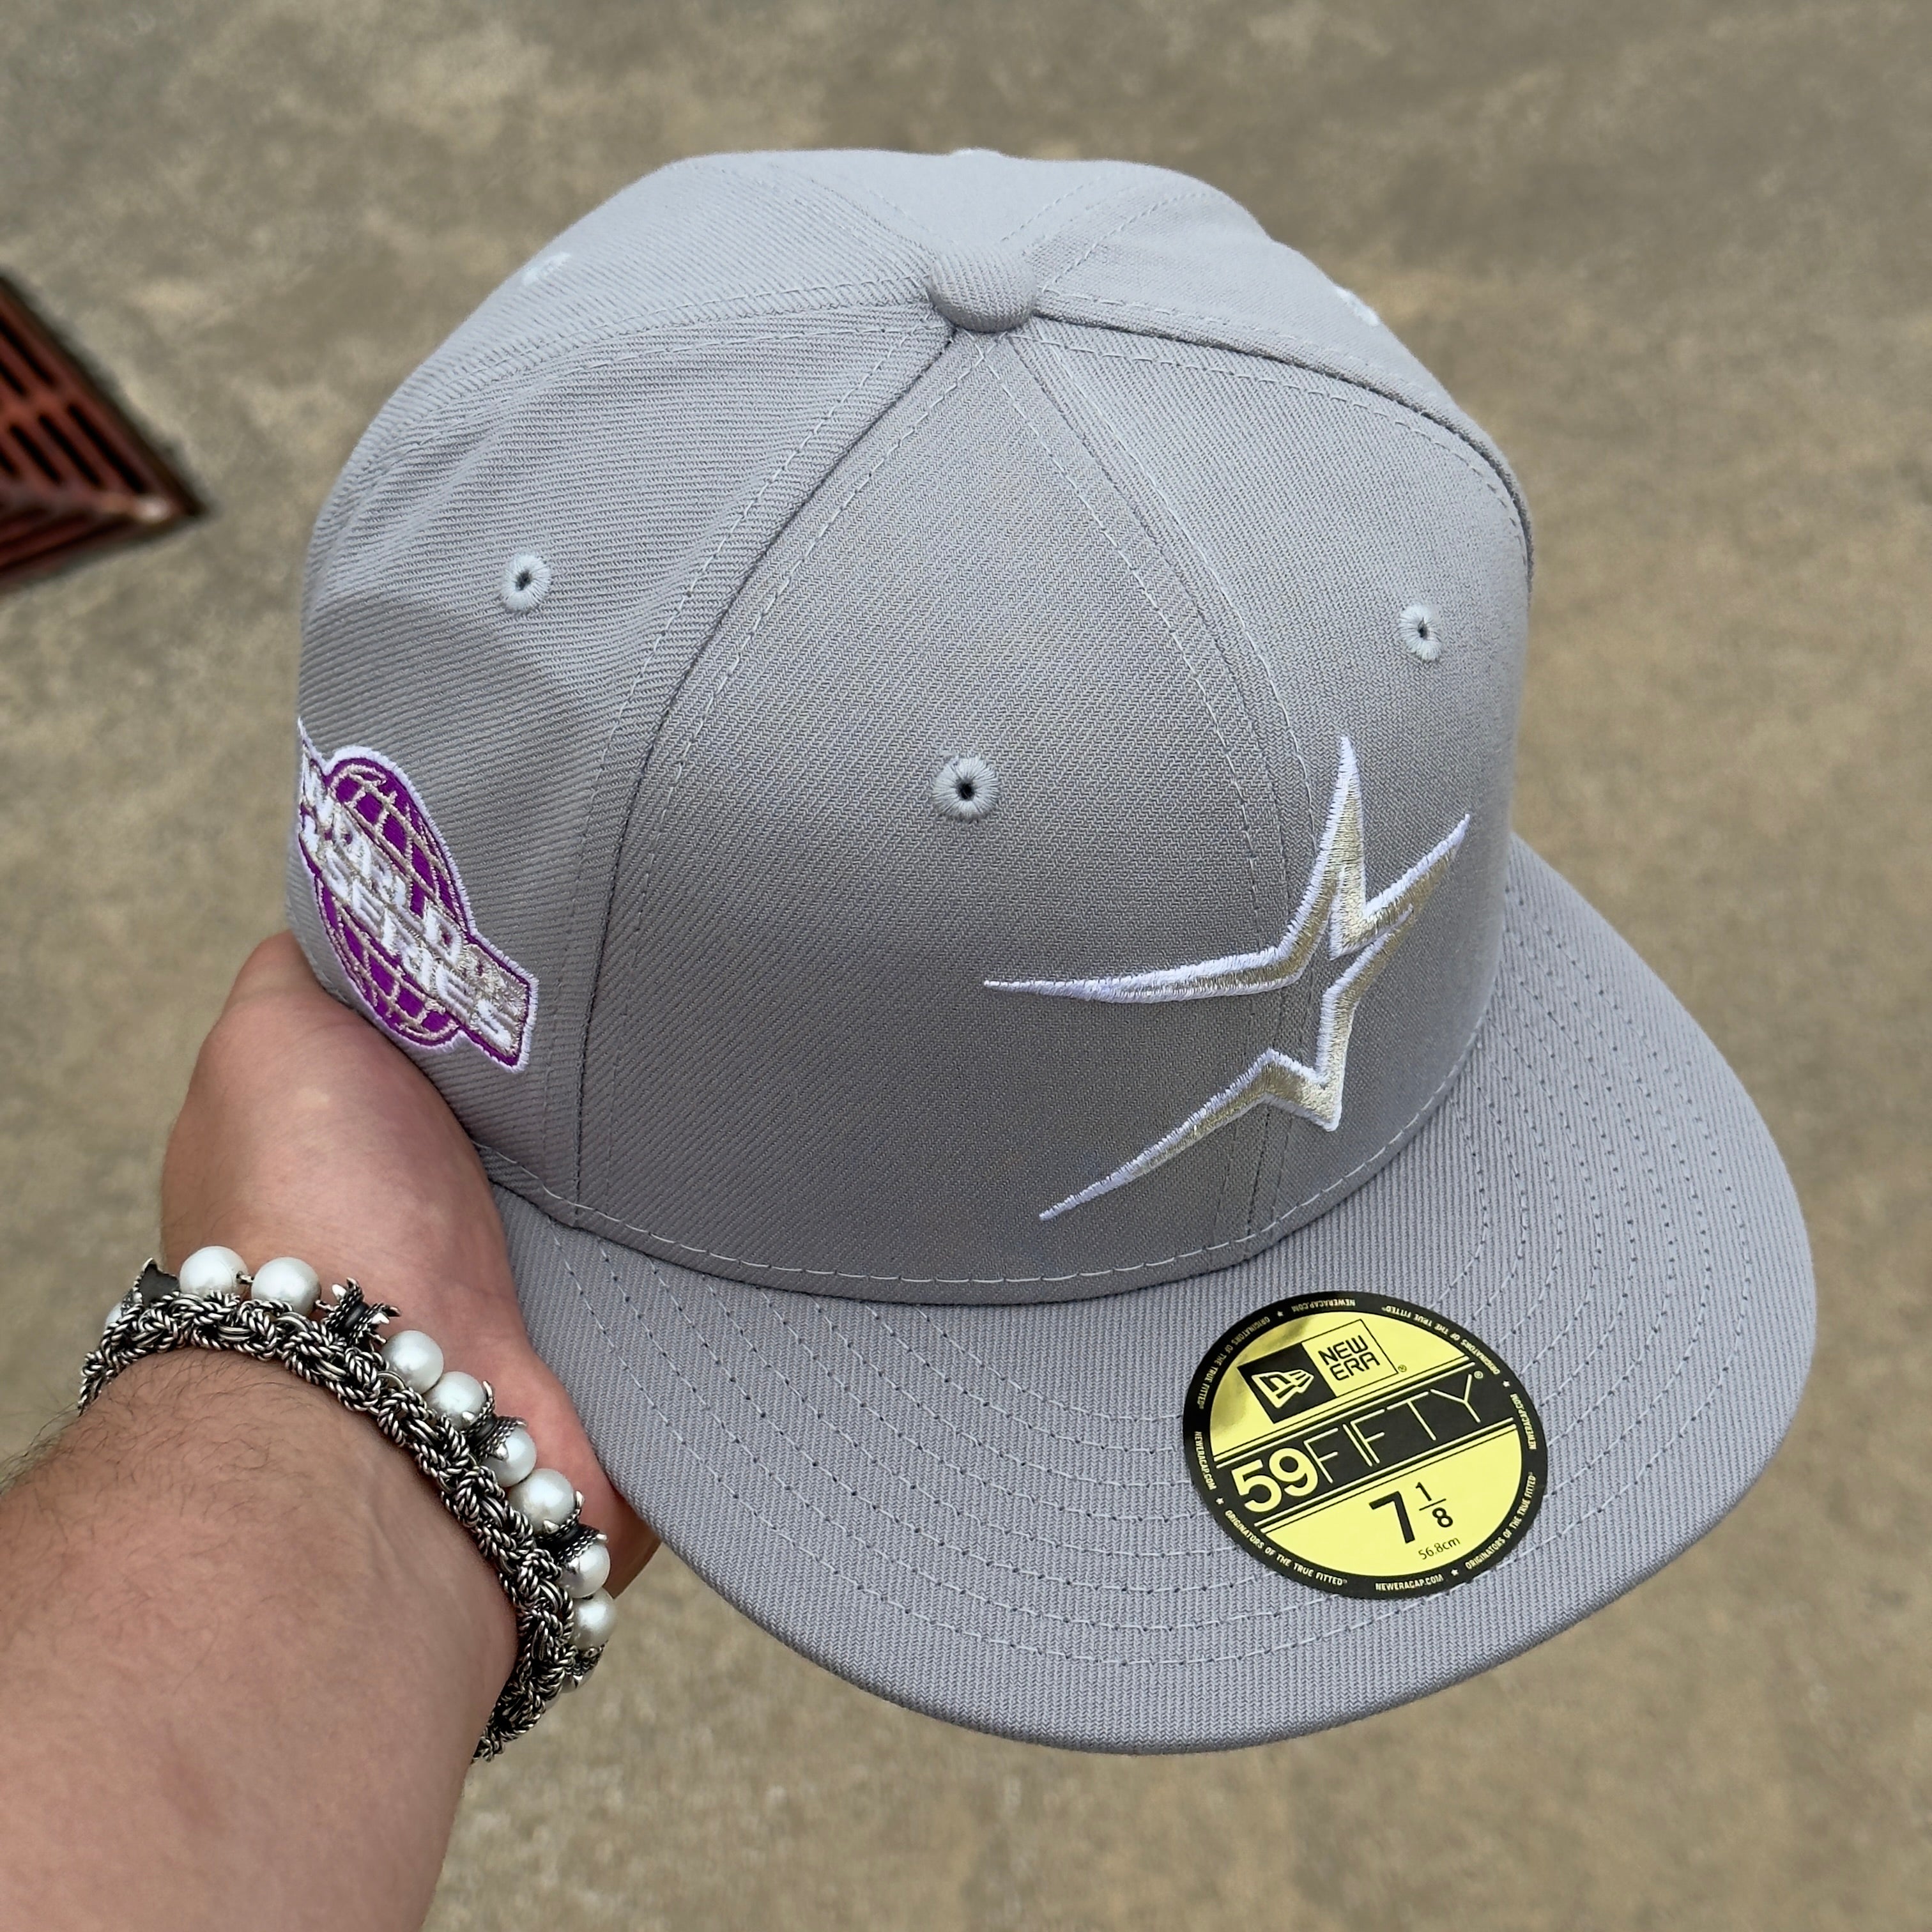 NEW Gray Purple Houston Astros World Series 2005 59fifty New Era Fitted Hat Cap